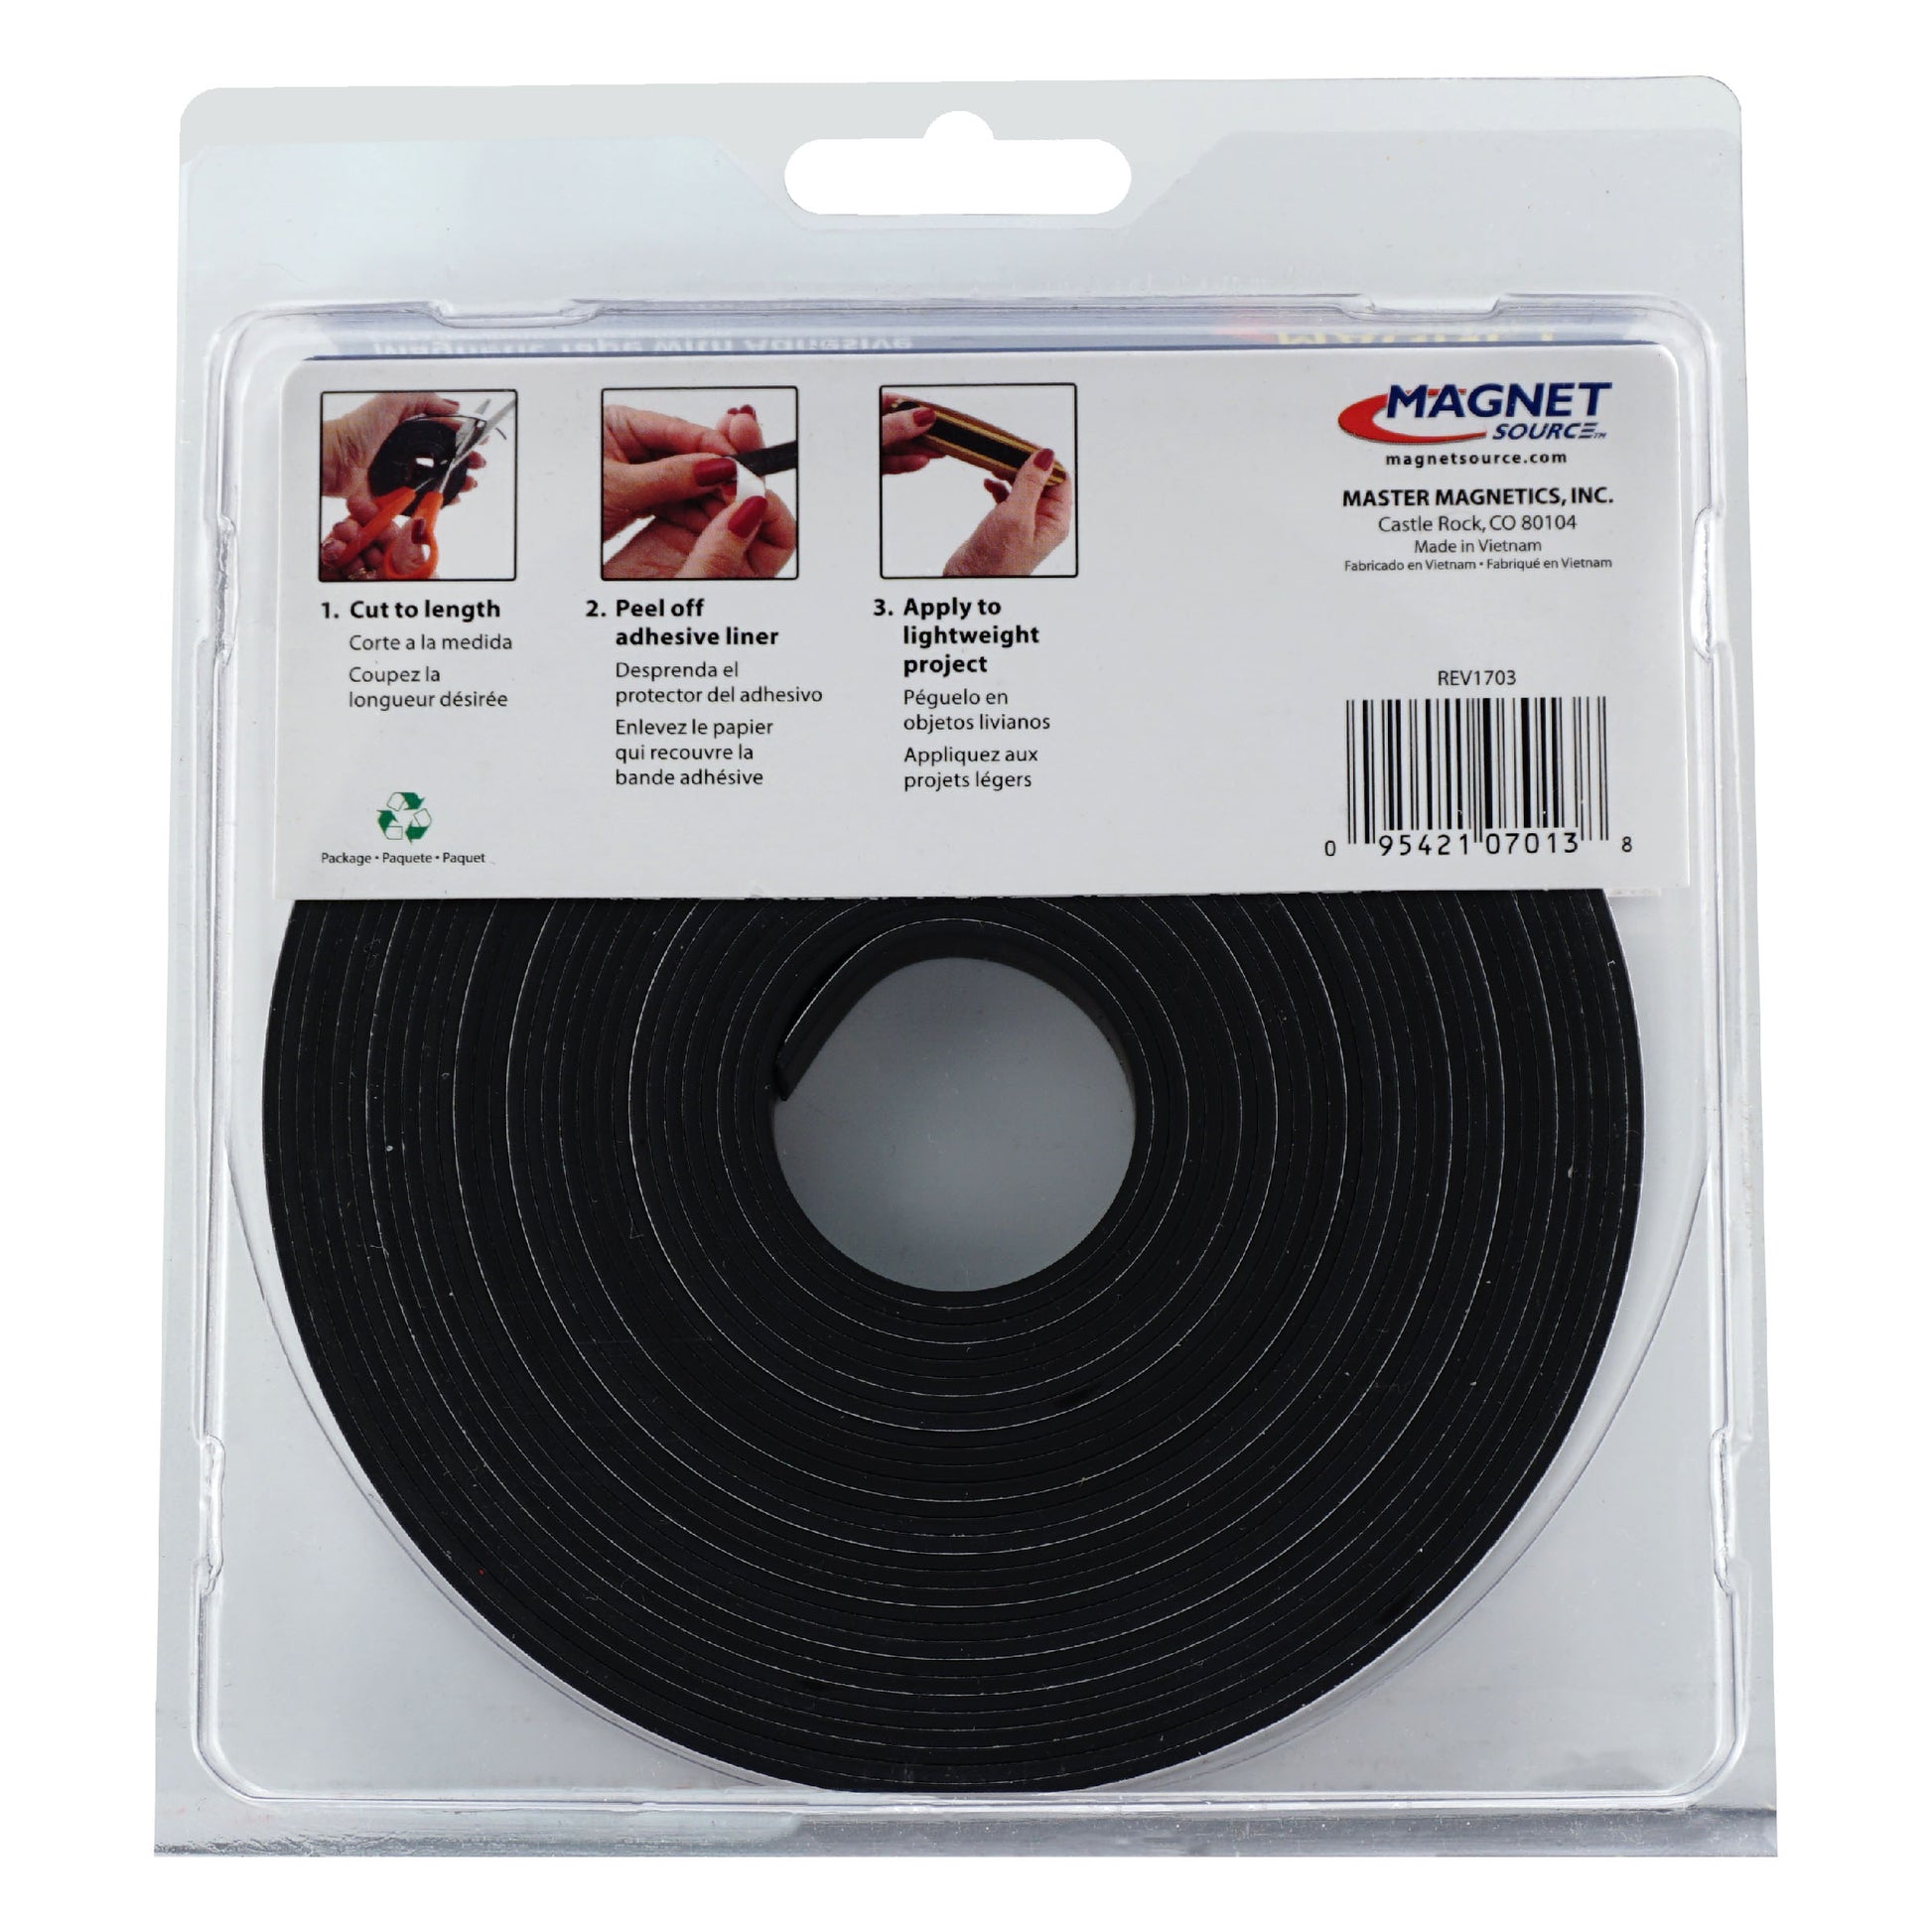 Load image into Gallery viewer, 07013 Flexible Magnetic Strip with Adhesive - Back of Packaging